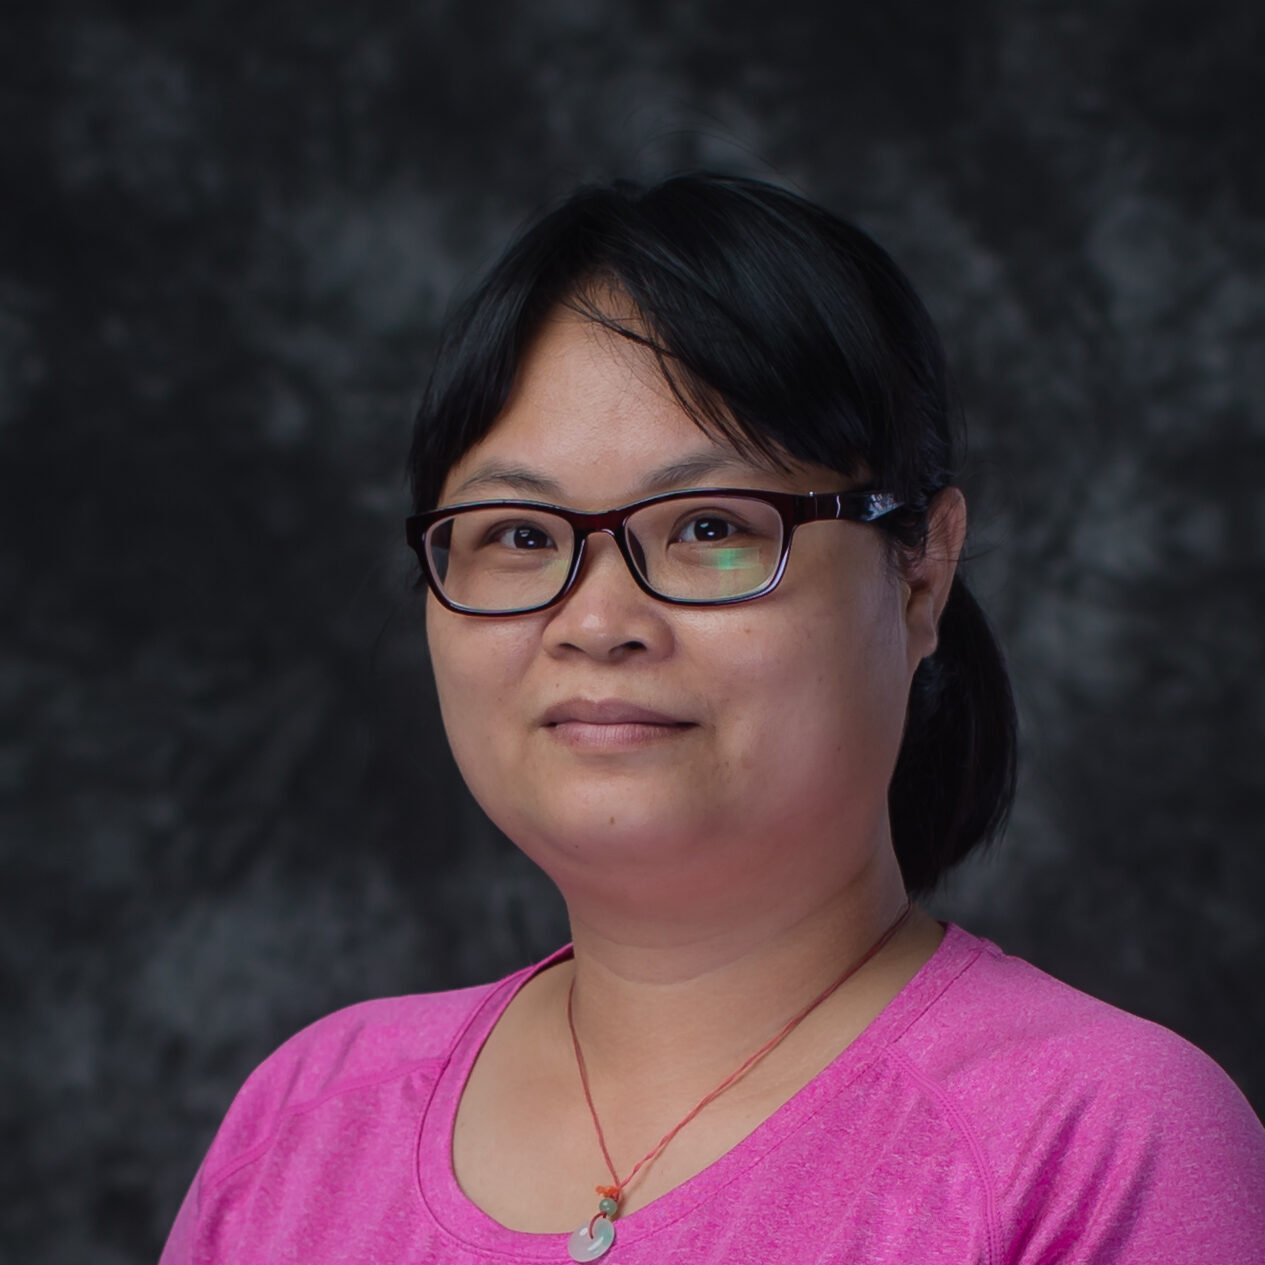 Portrait of Siping Huang, Office Support staff at Clifford International School in Panyu, Guangzhou, China